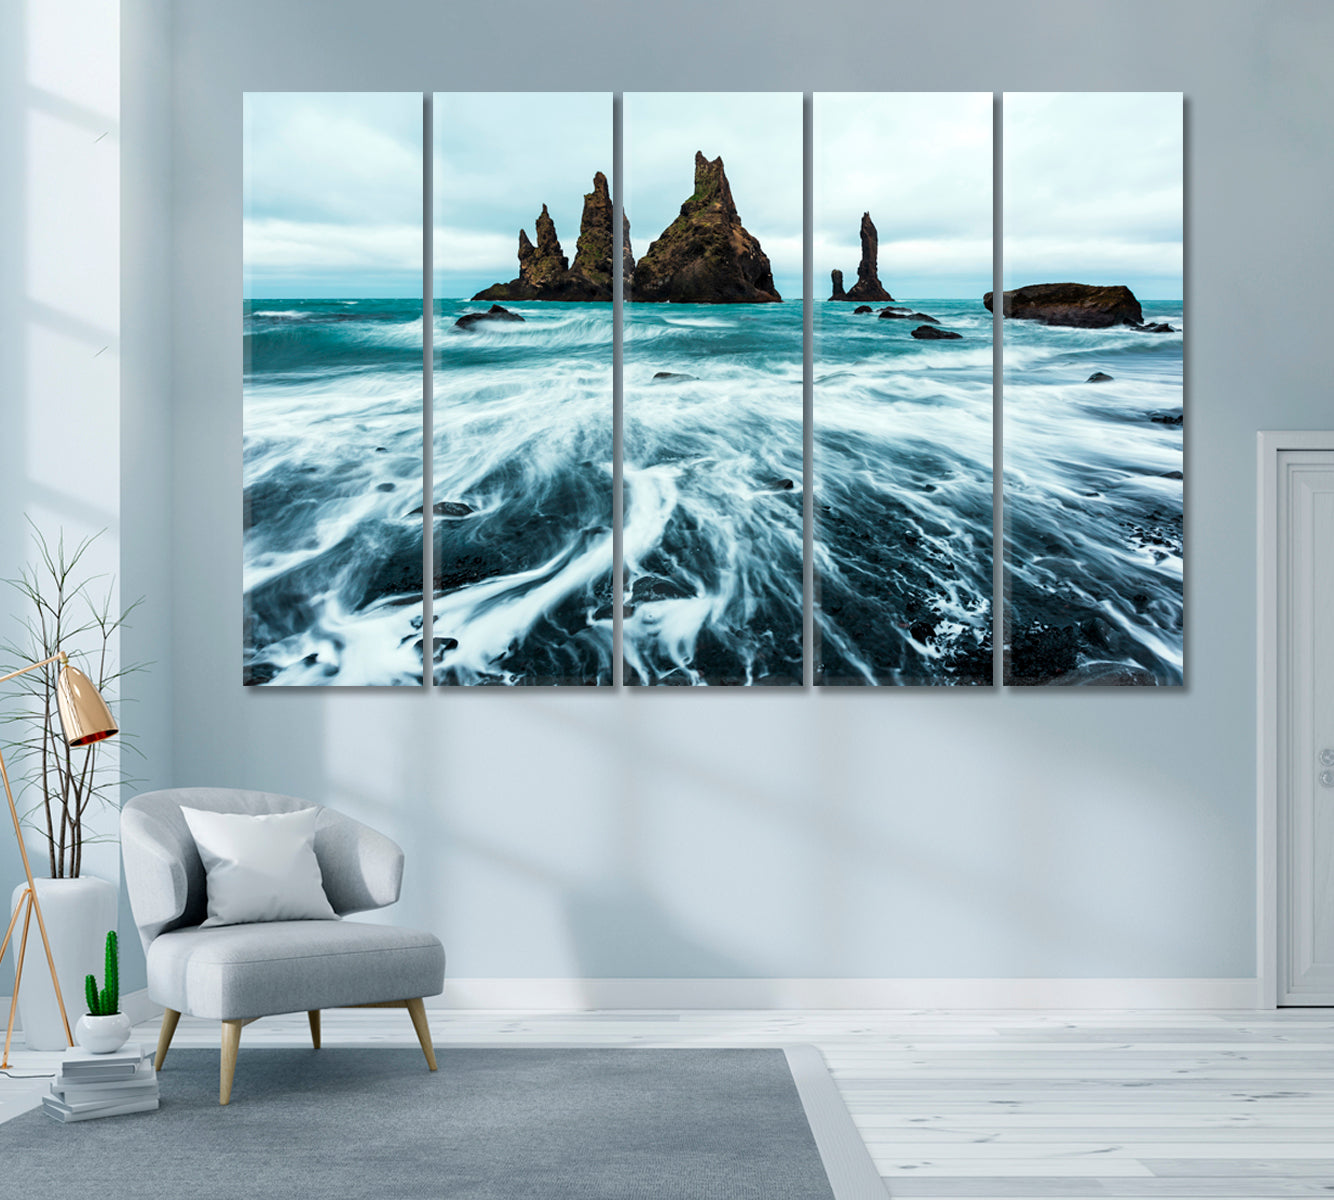 Rock Troll Toes Iceland Canvas Print ArtLexy 5 Panels 36"x24" inches 